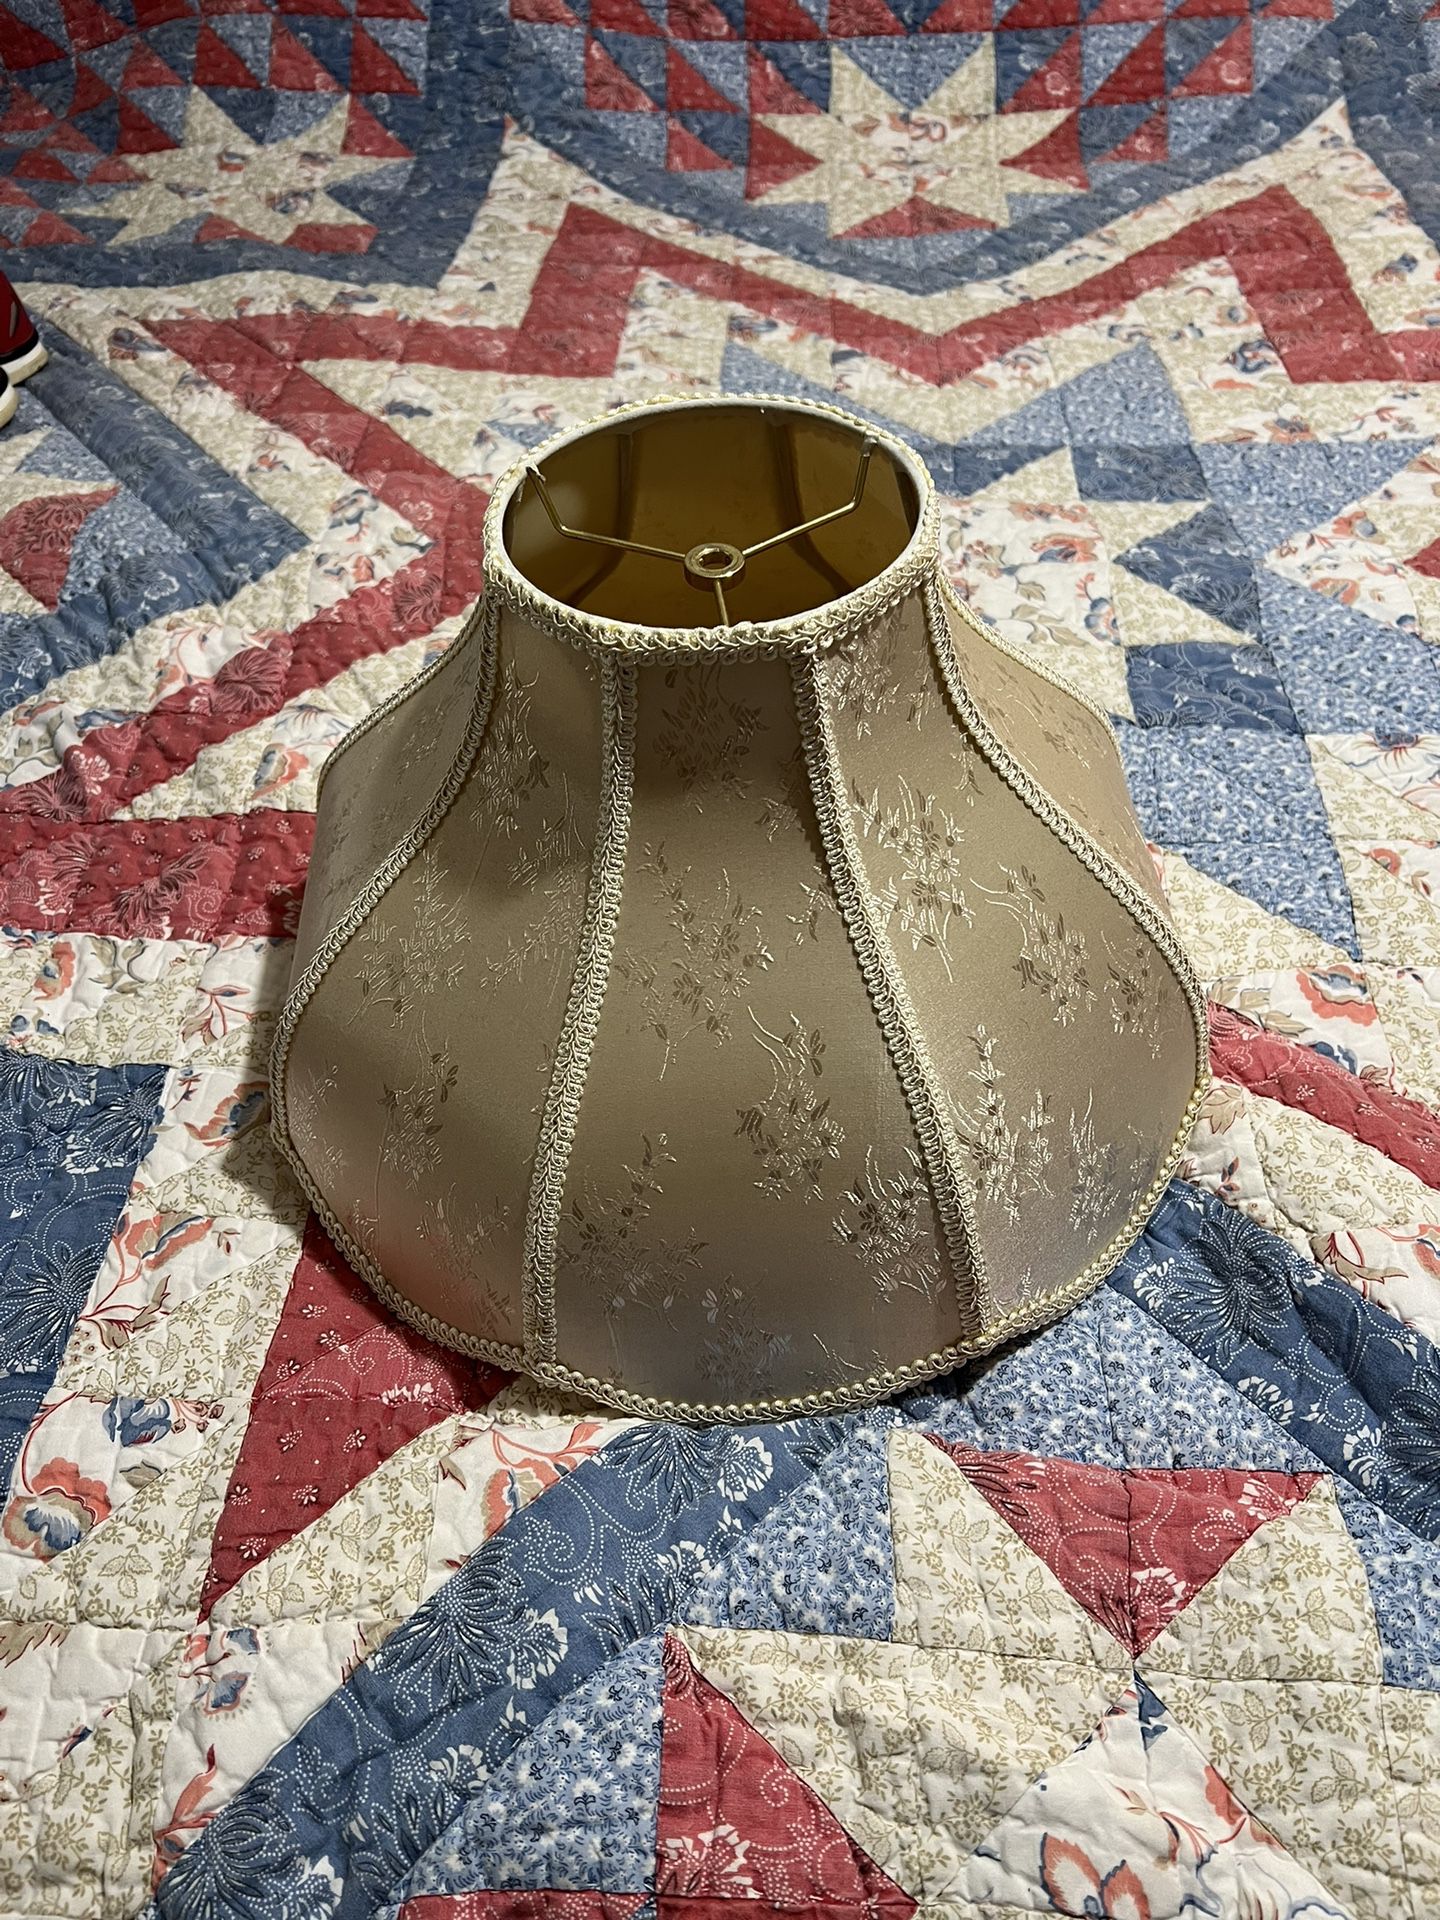 Bell Shaped Lampshade In Brand New Condition Never Used